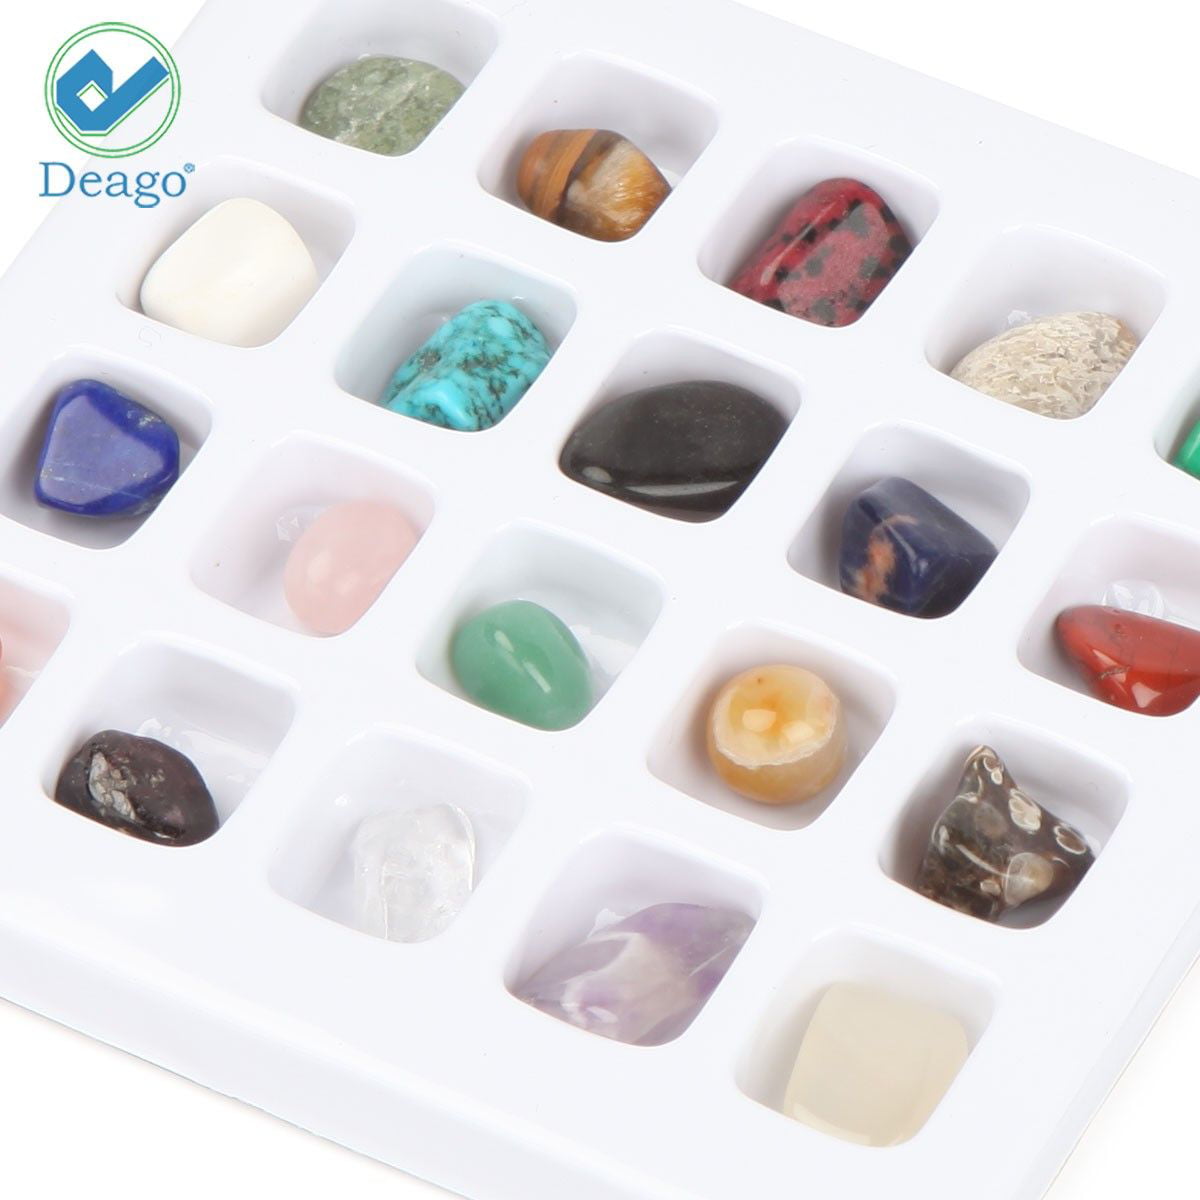 Card EYE and VISION REPAIR Tumbled Crystal Healing Set = 4 Stones Pouch 